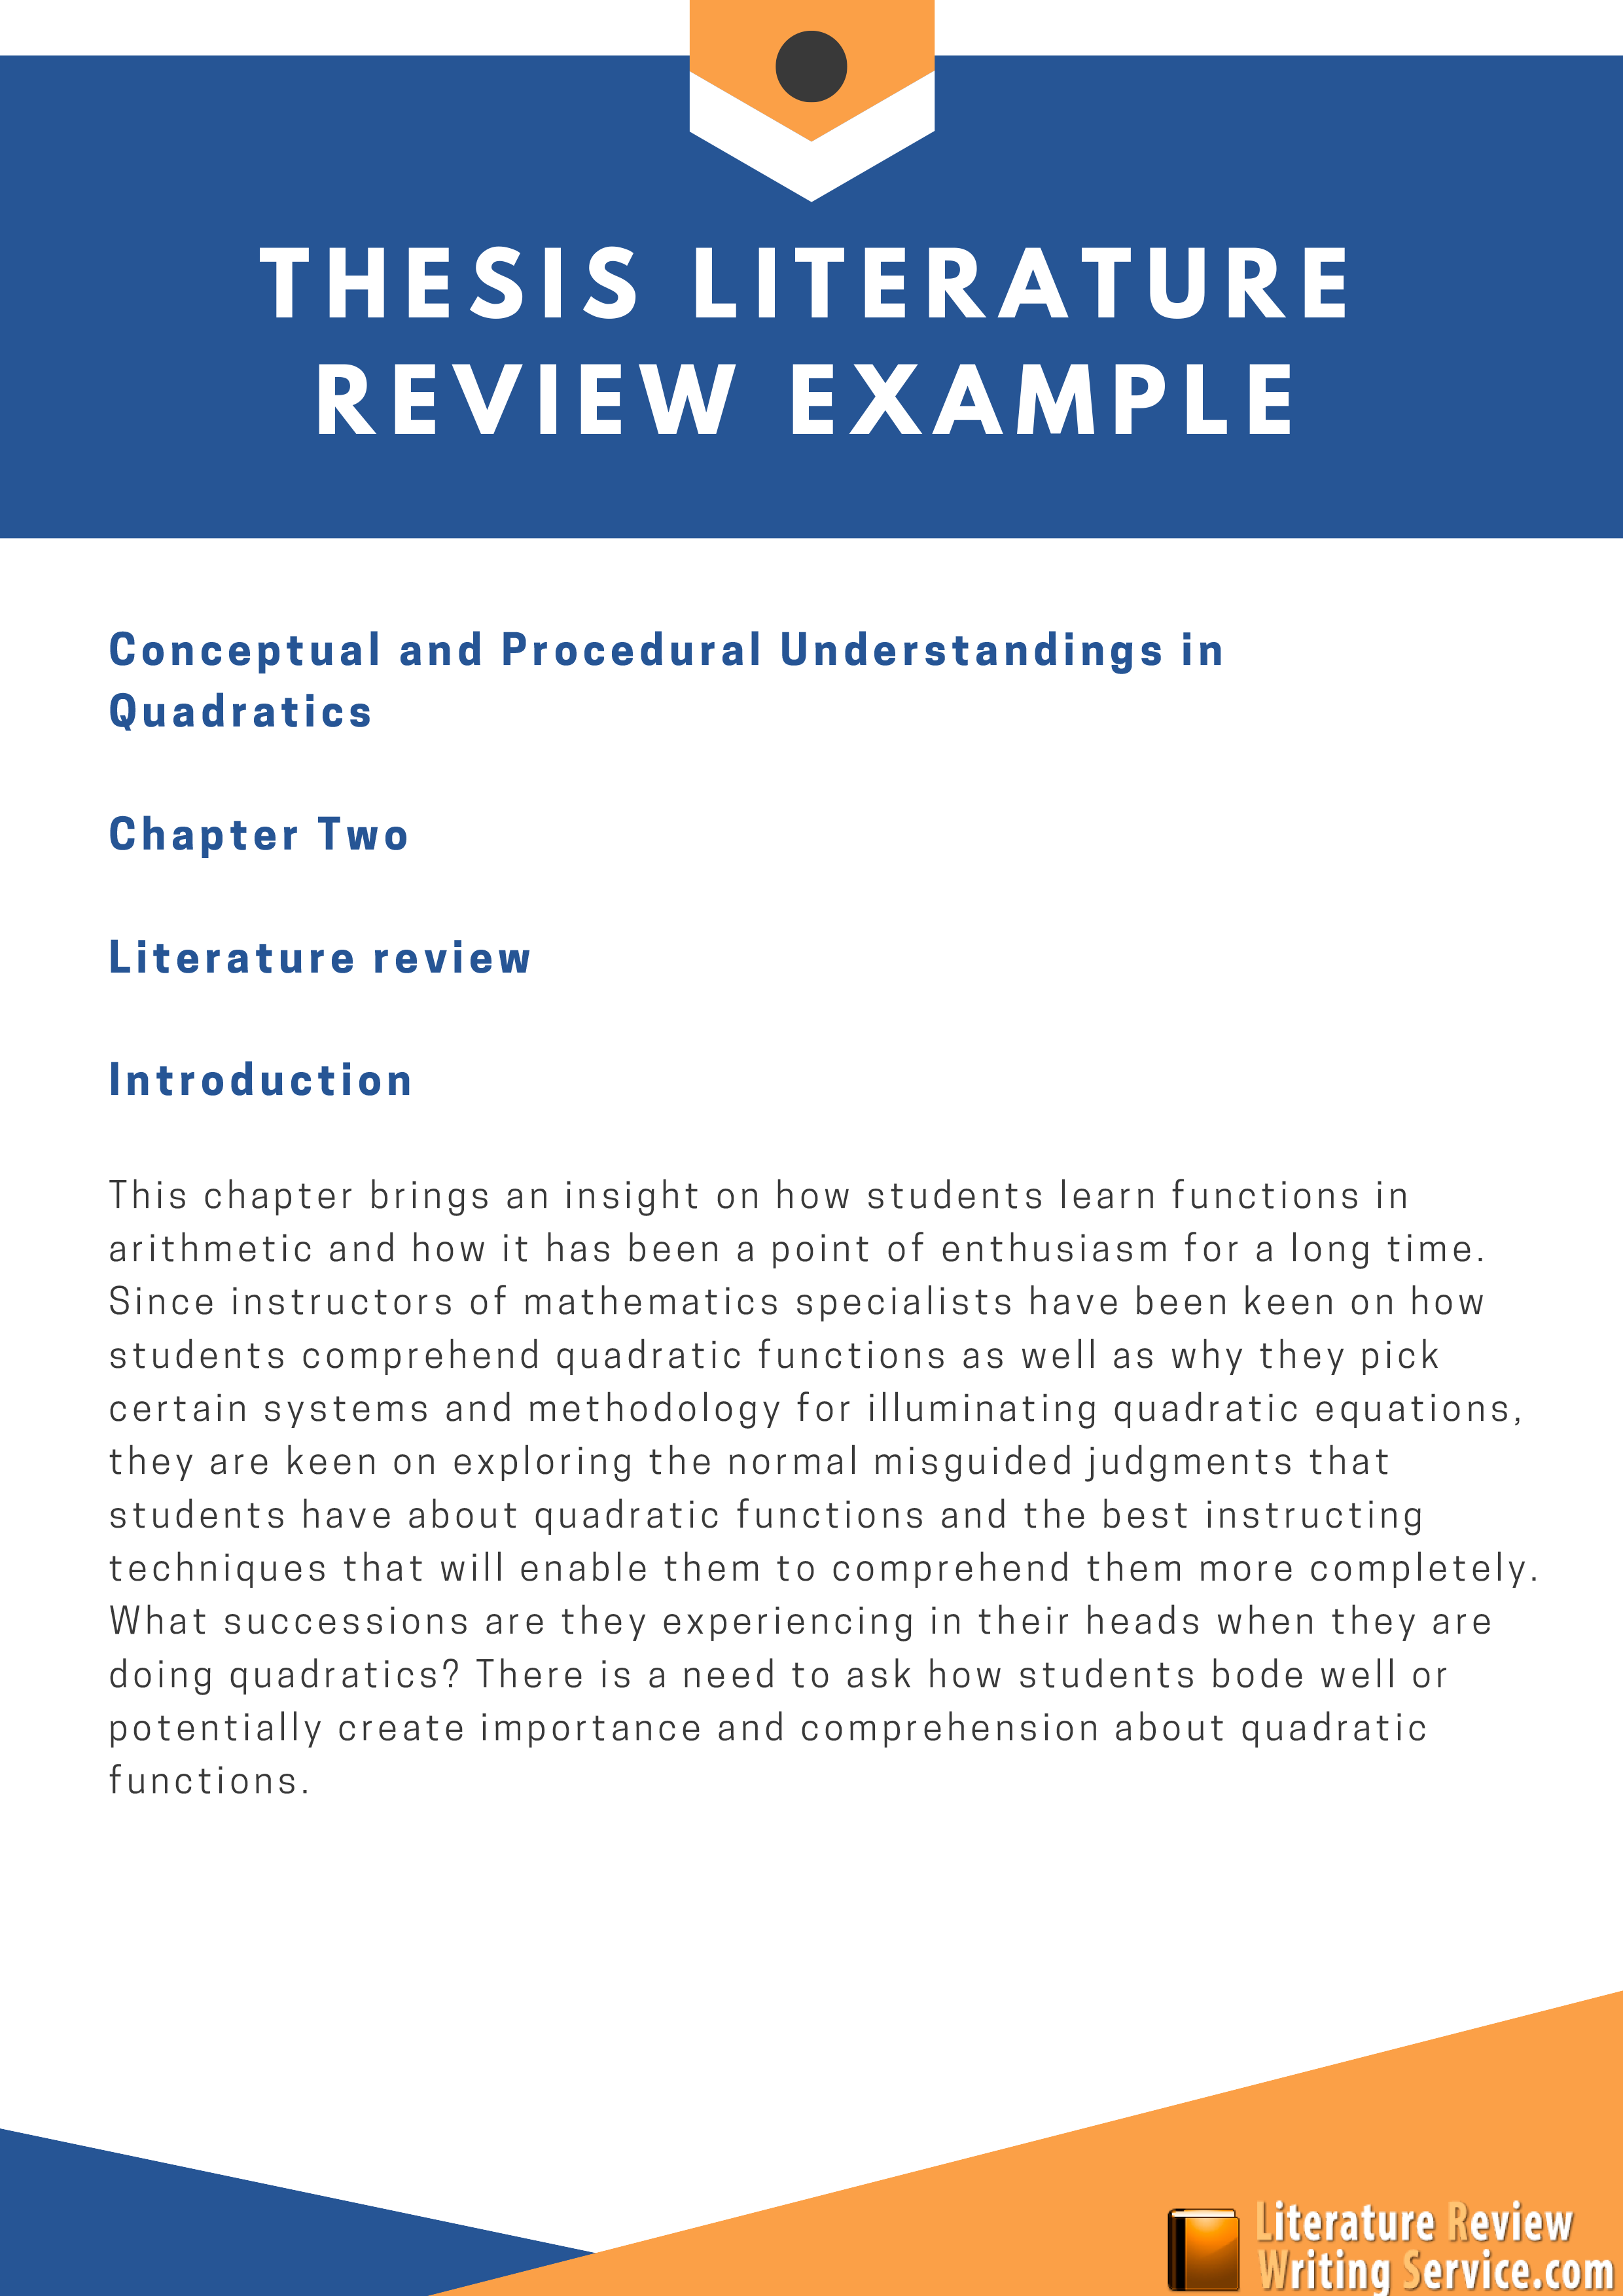 complete dissertation review